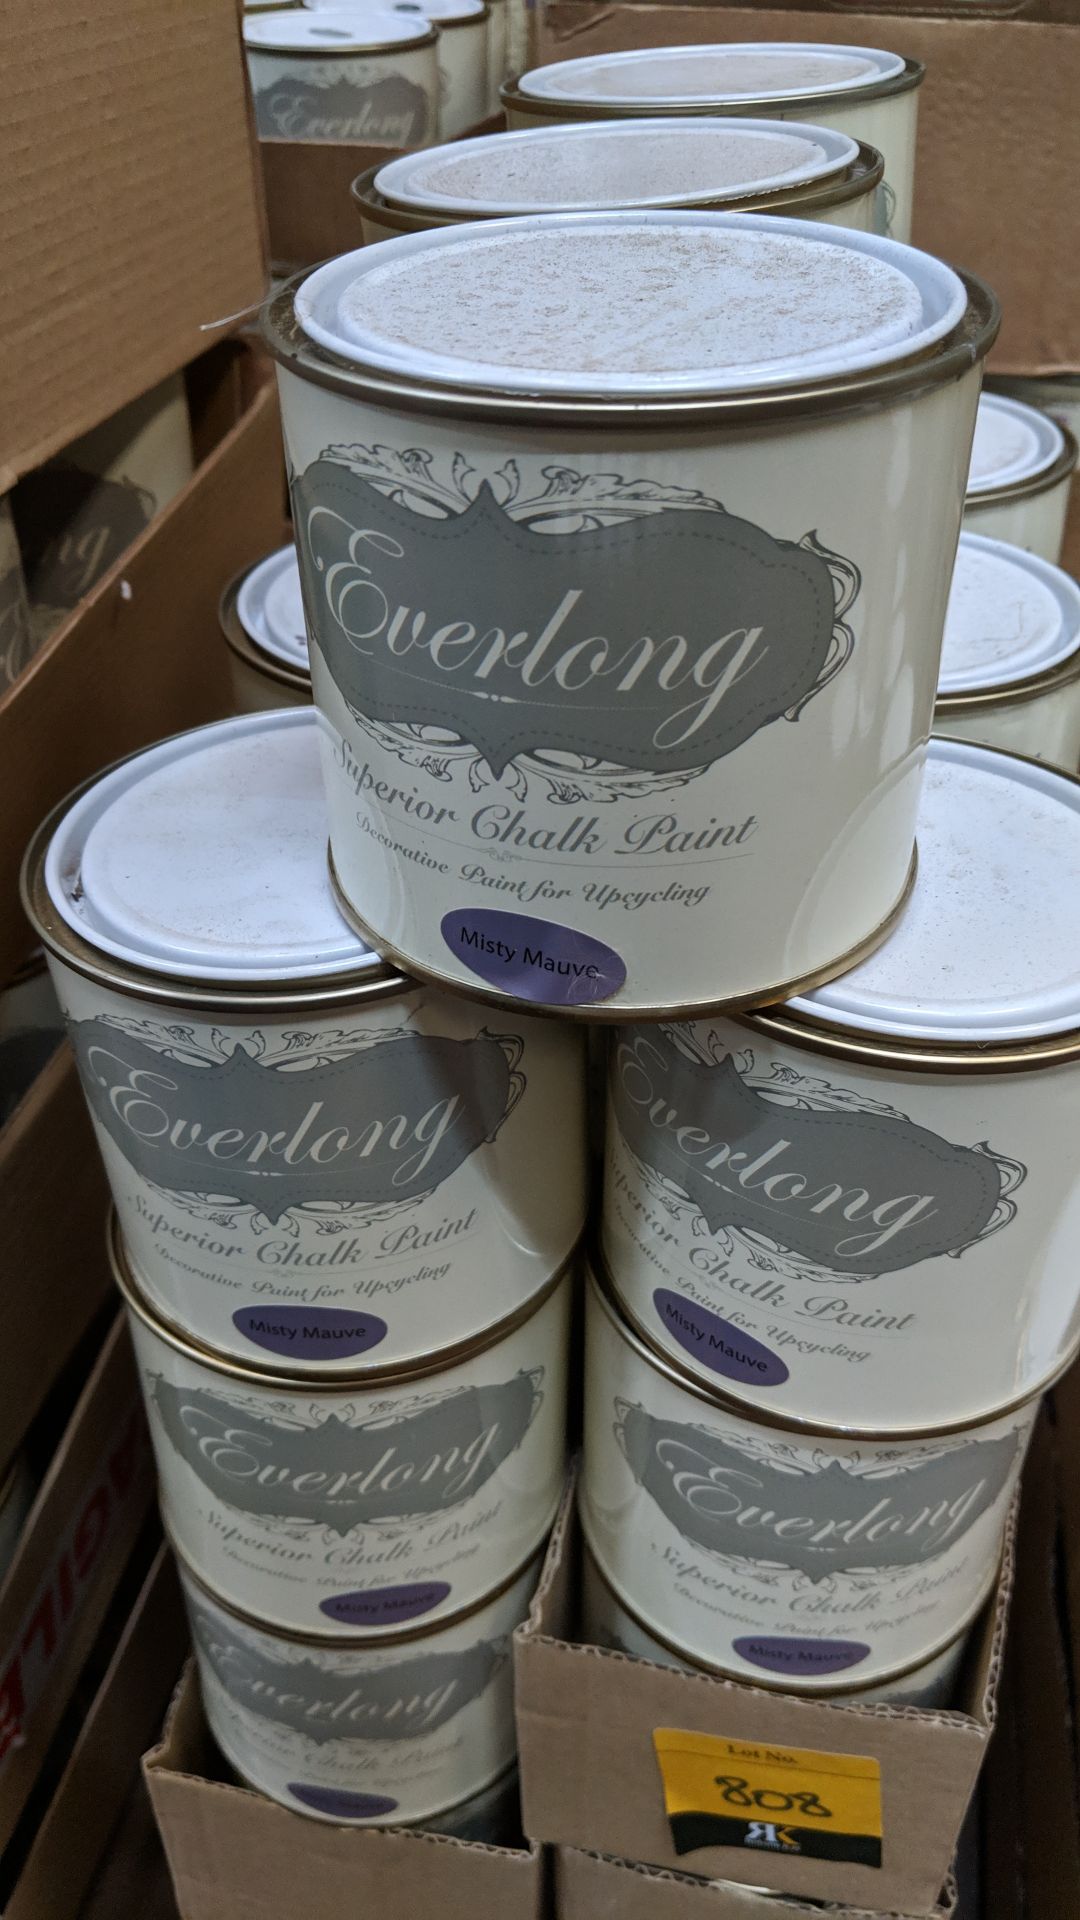 39 off 500ml tins of Everlong branded superior chalk paint - colour Misty Mauve This lot is one of a - Image 2 of 2